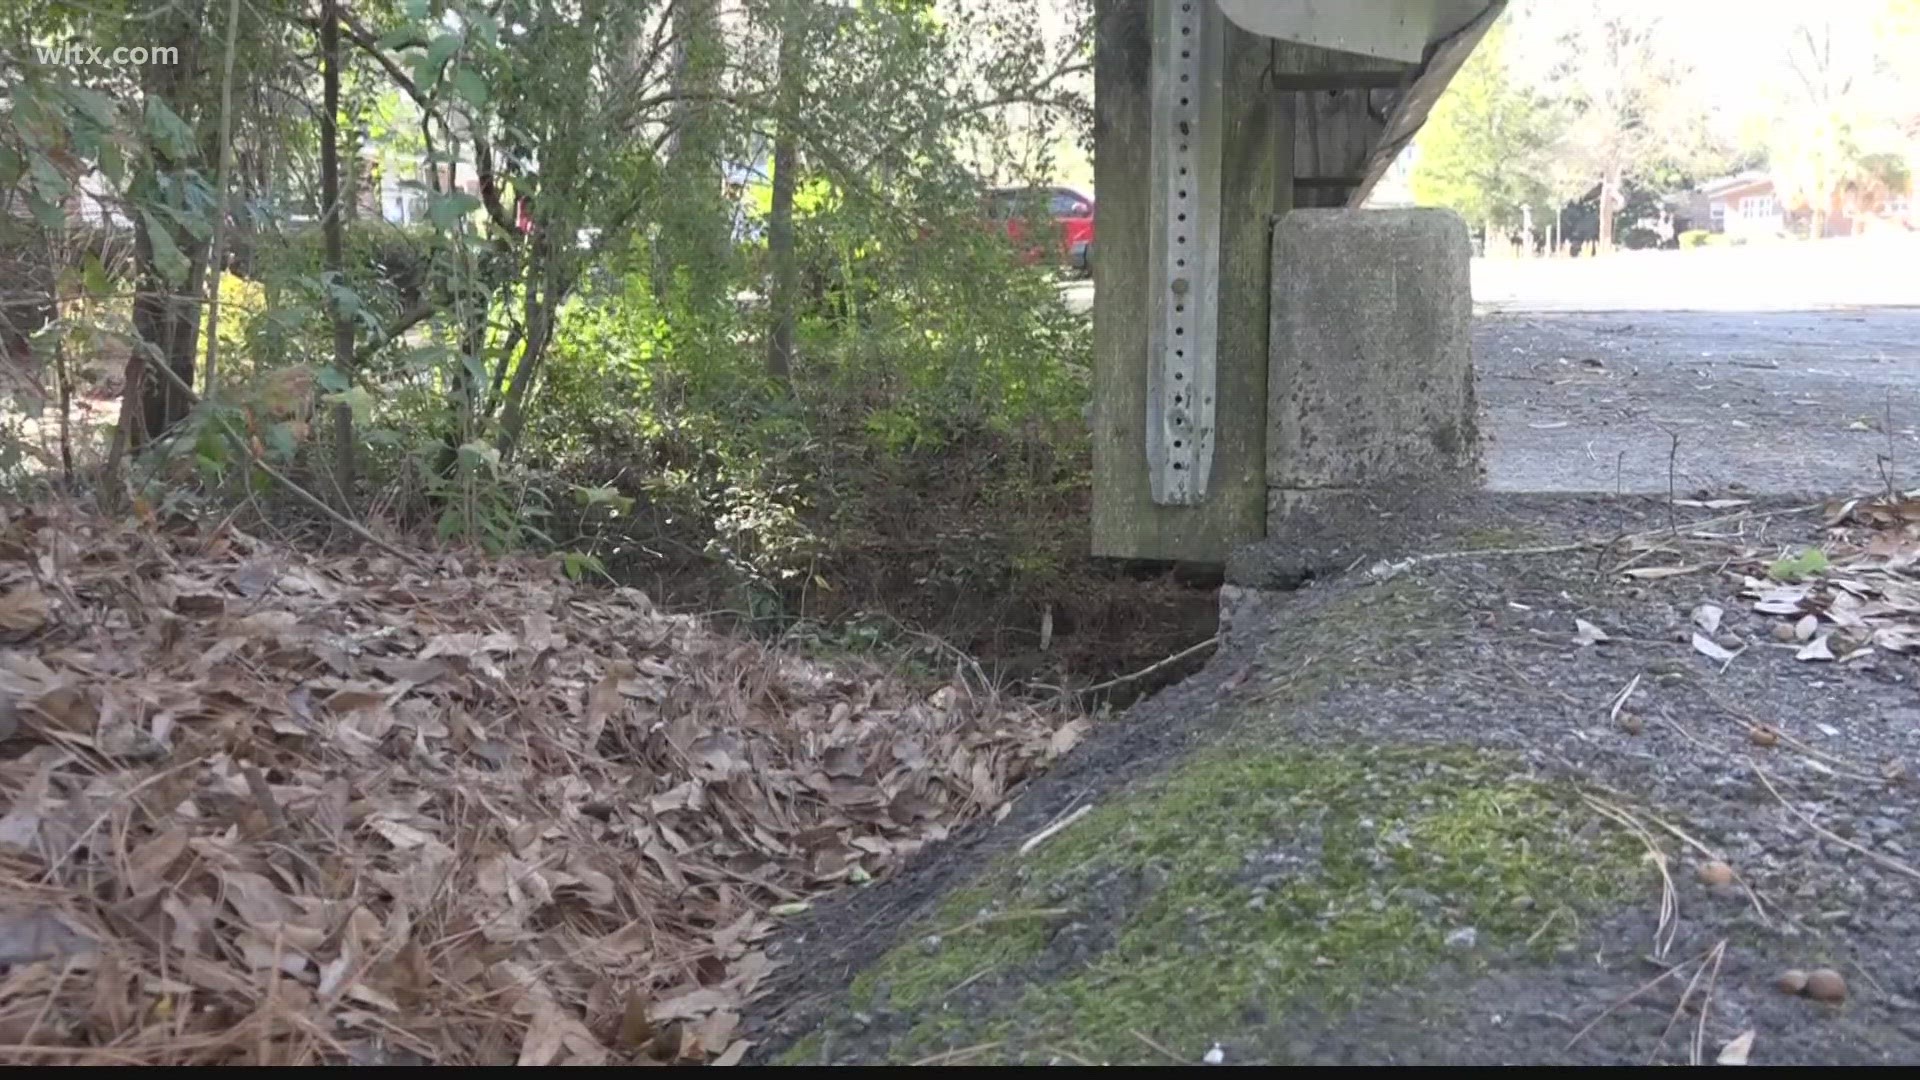 Residents in the Forest Acres neighborhood reached out to see when the bridge will open.